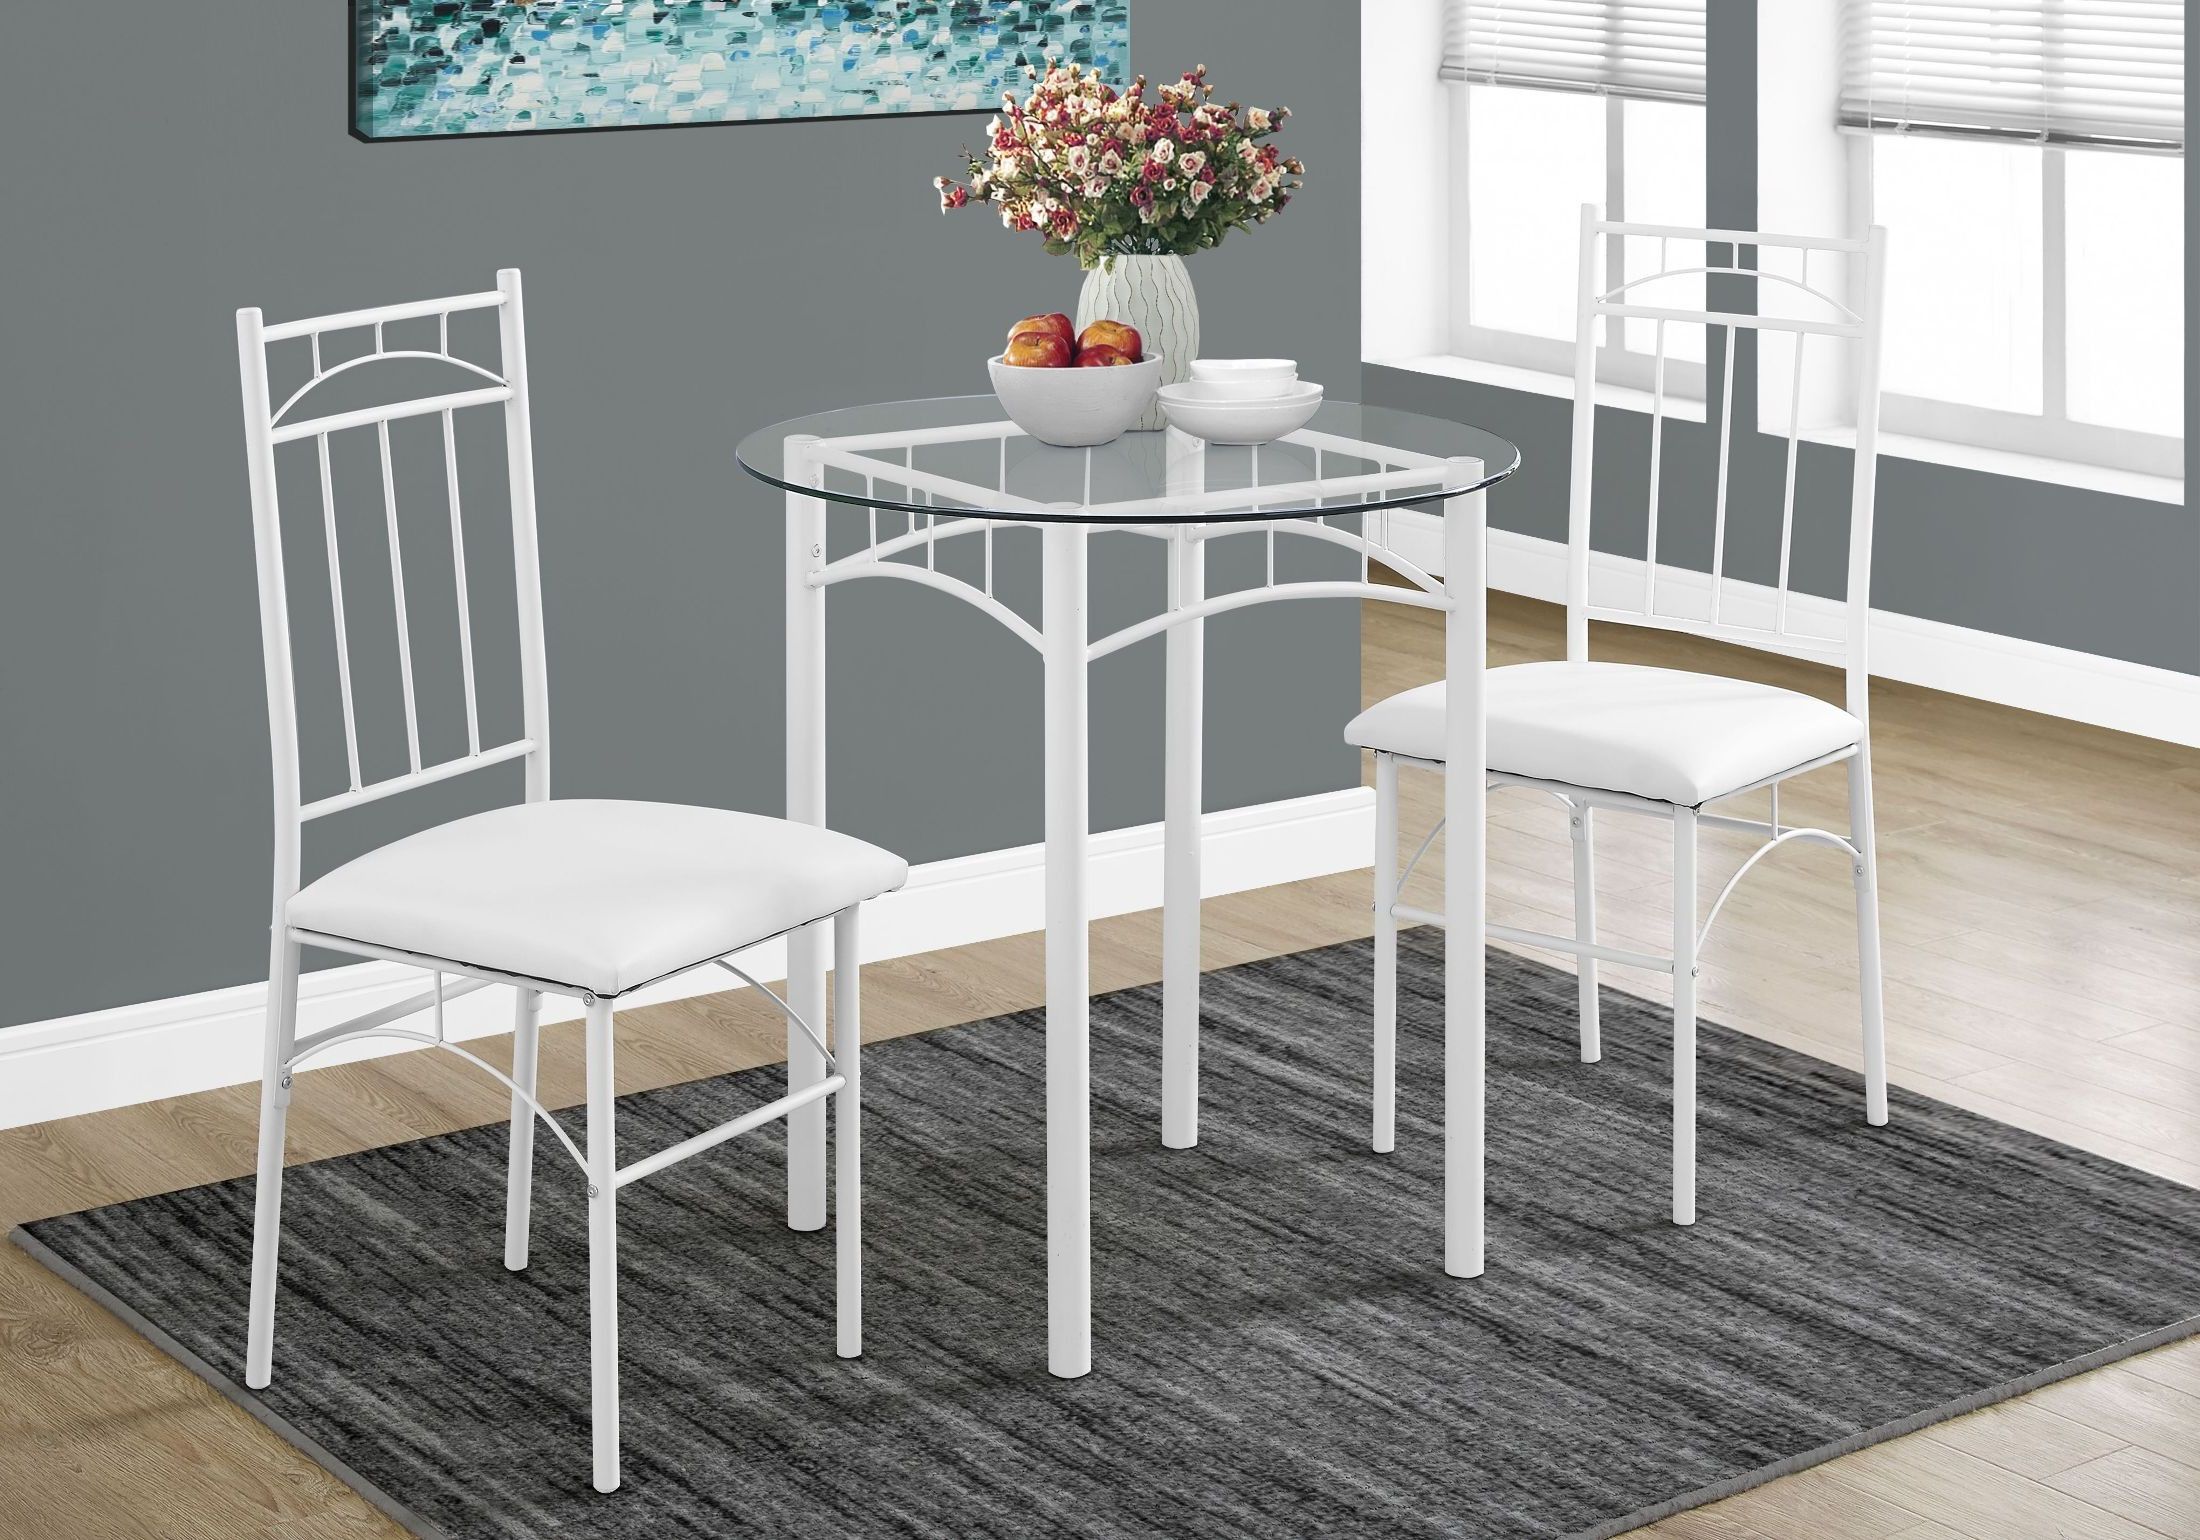 Well Known 3 Piece Bistro Dining Sets With Regard To White Metal 3 Piece Dining Room Set From Monarch (View 11 of 15)